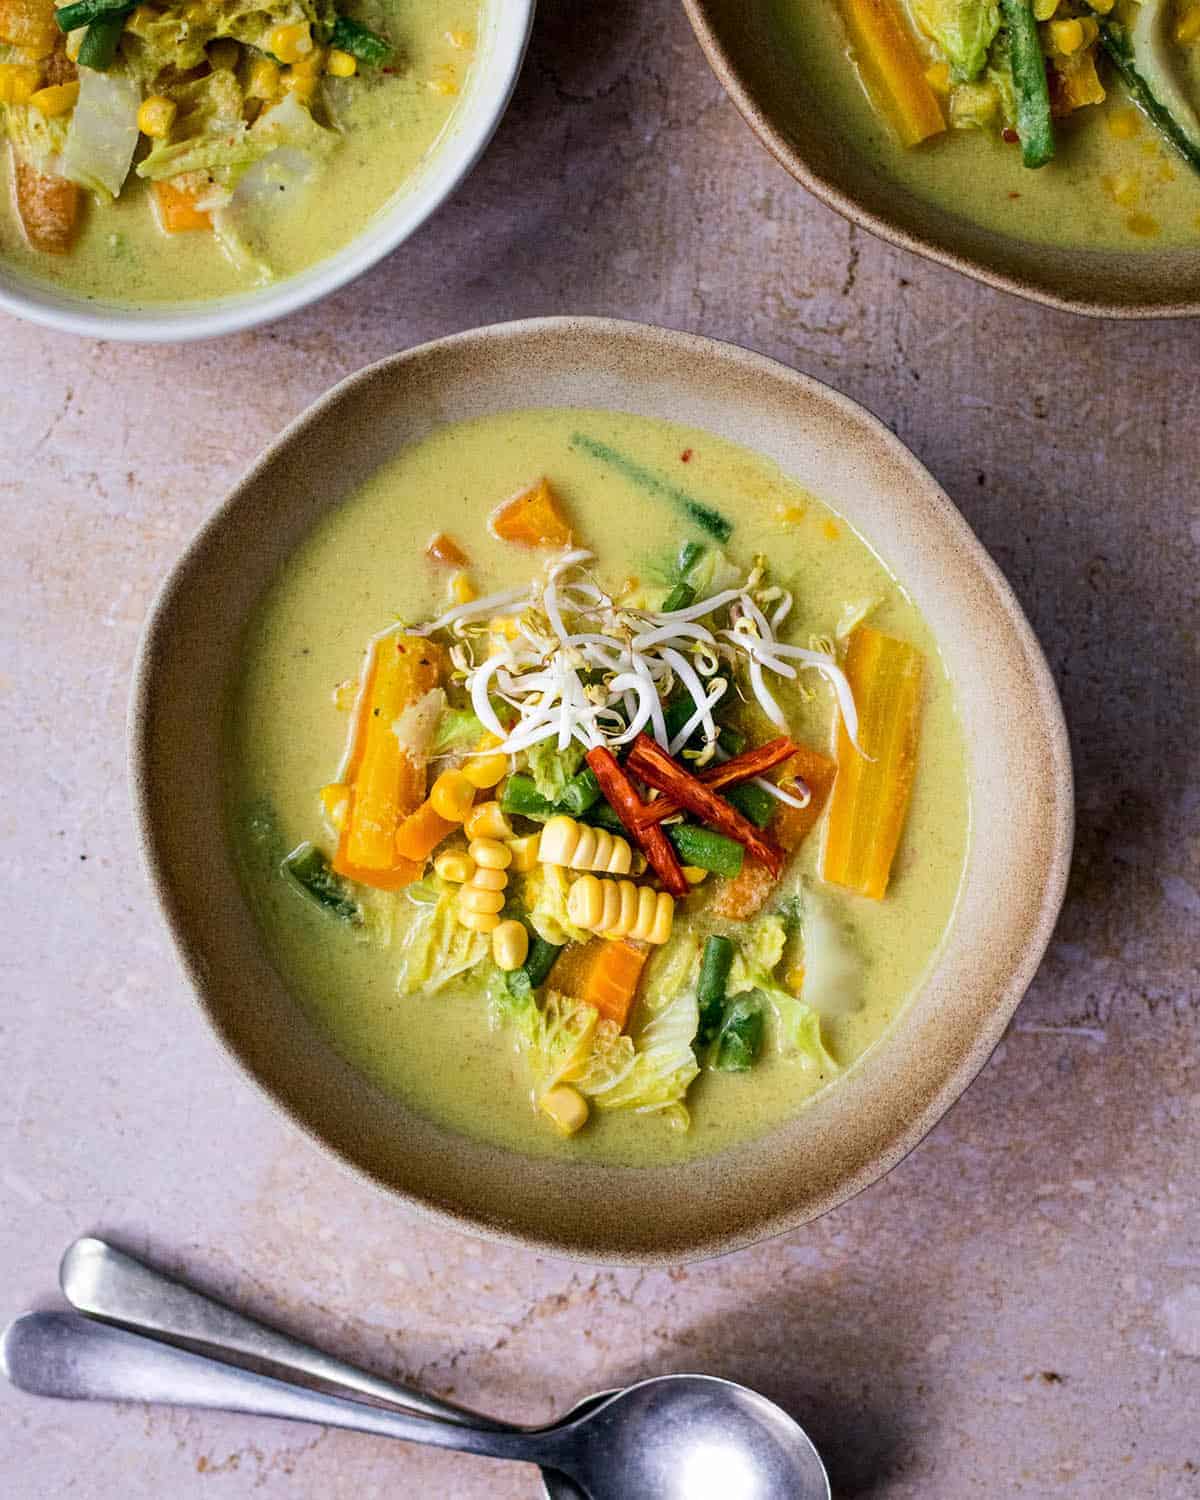 Sayur lodeh (vegetables in coconut milk) in a bowl with two spoons in front of it and bowls in the background